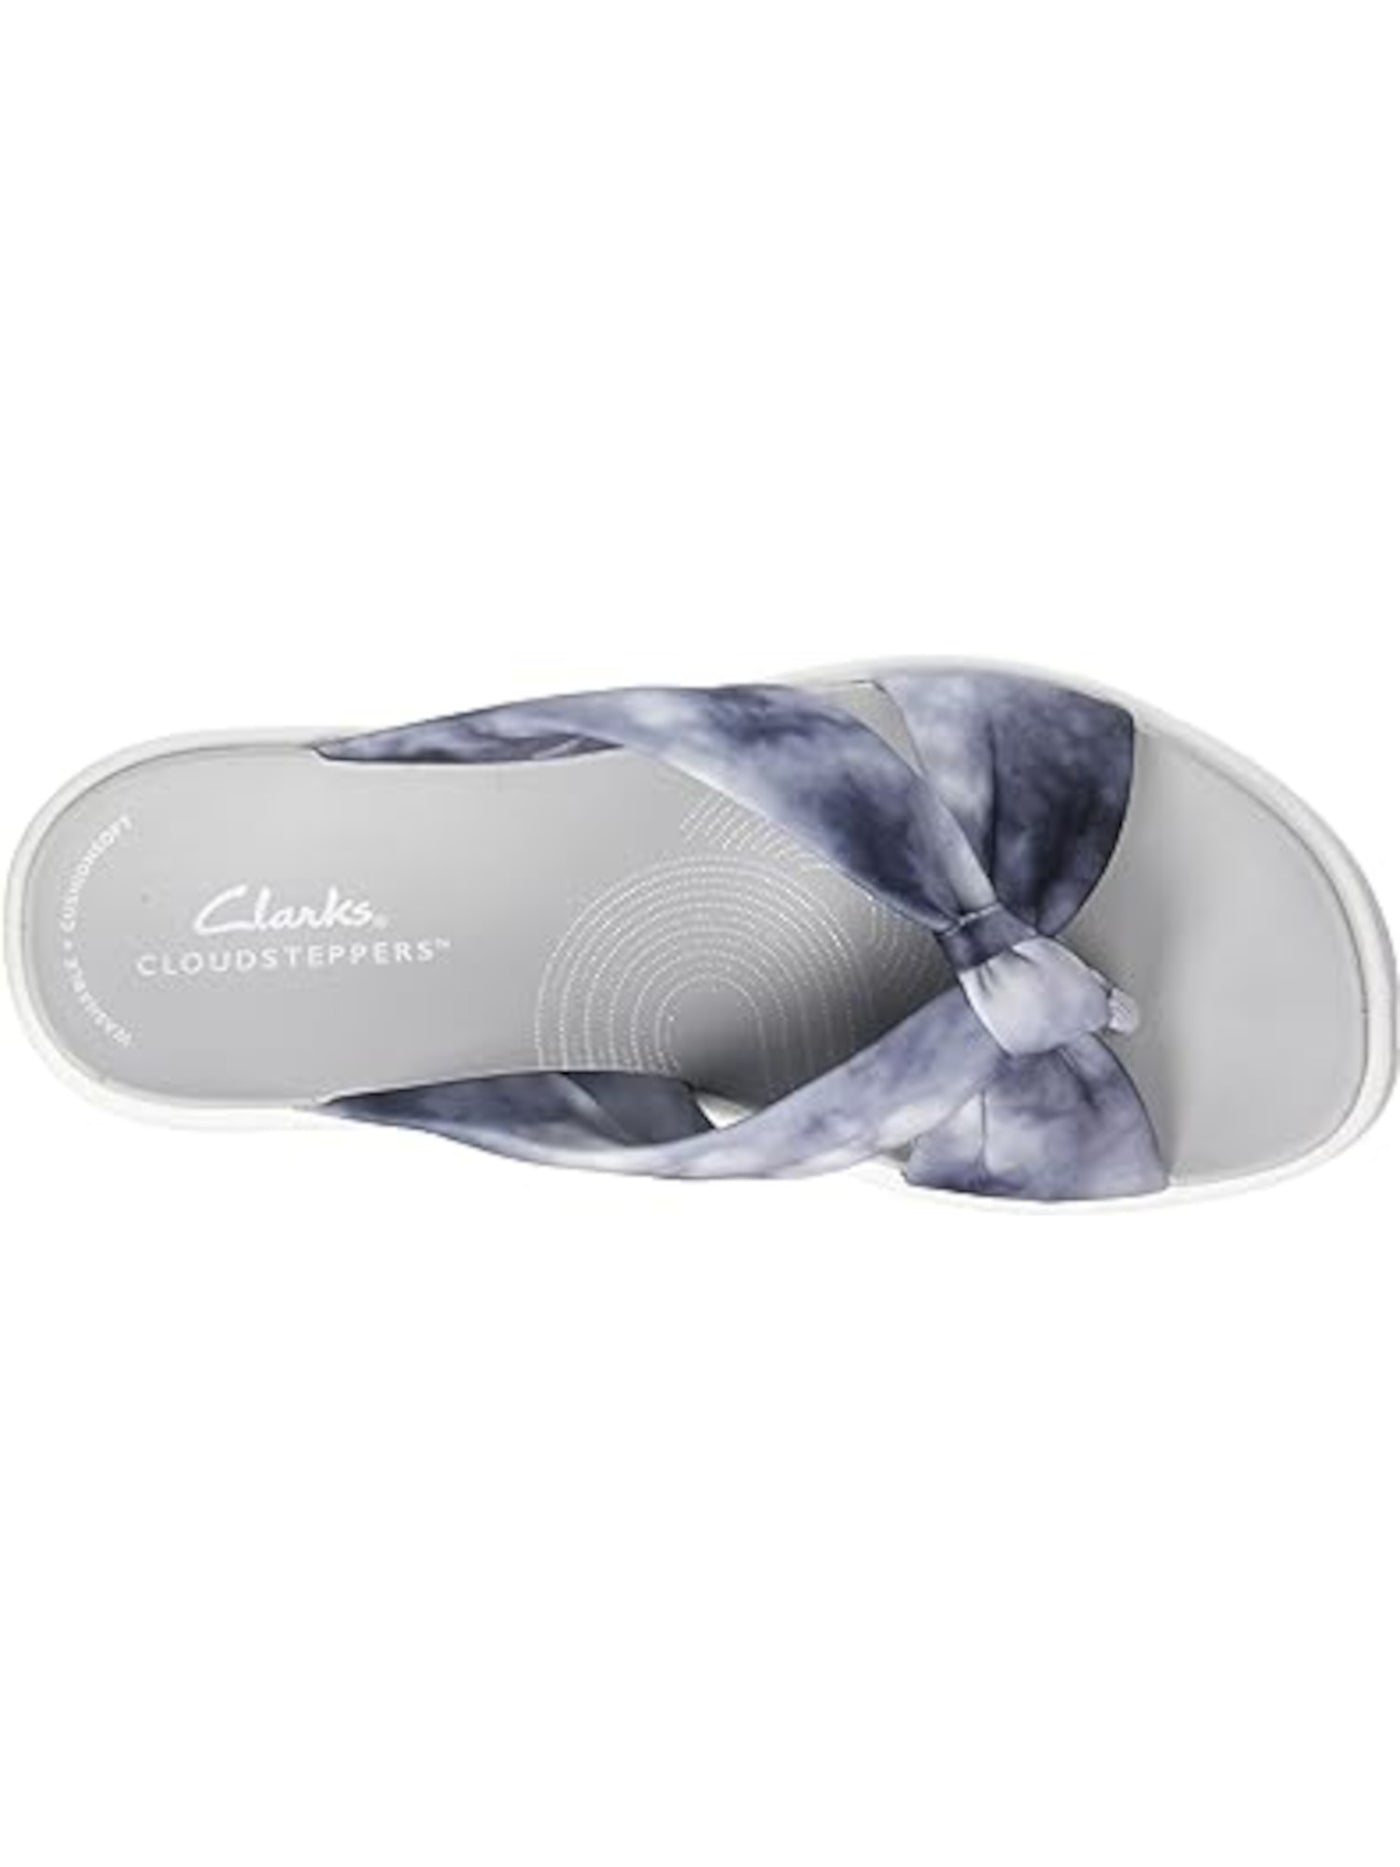 CLOUD STEPPERS BY CLARKS Womens Black Combination Gray Tie Dye Knotted Flexible Sole 1" Platform Cushioned Comfort Drift Round Toe Wedge Slip On Sandals Shoes 8 W